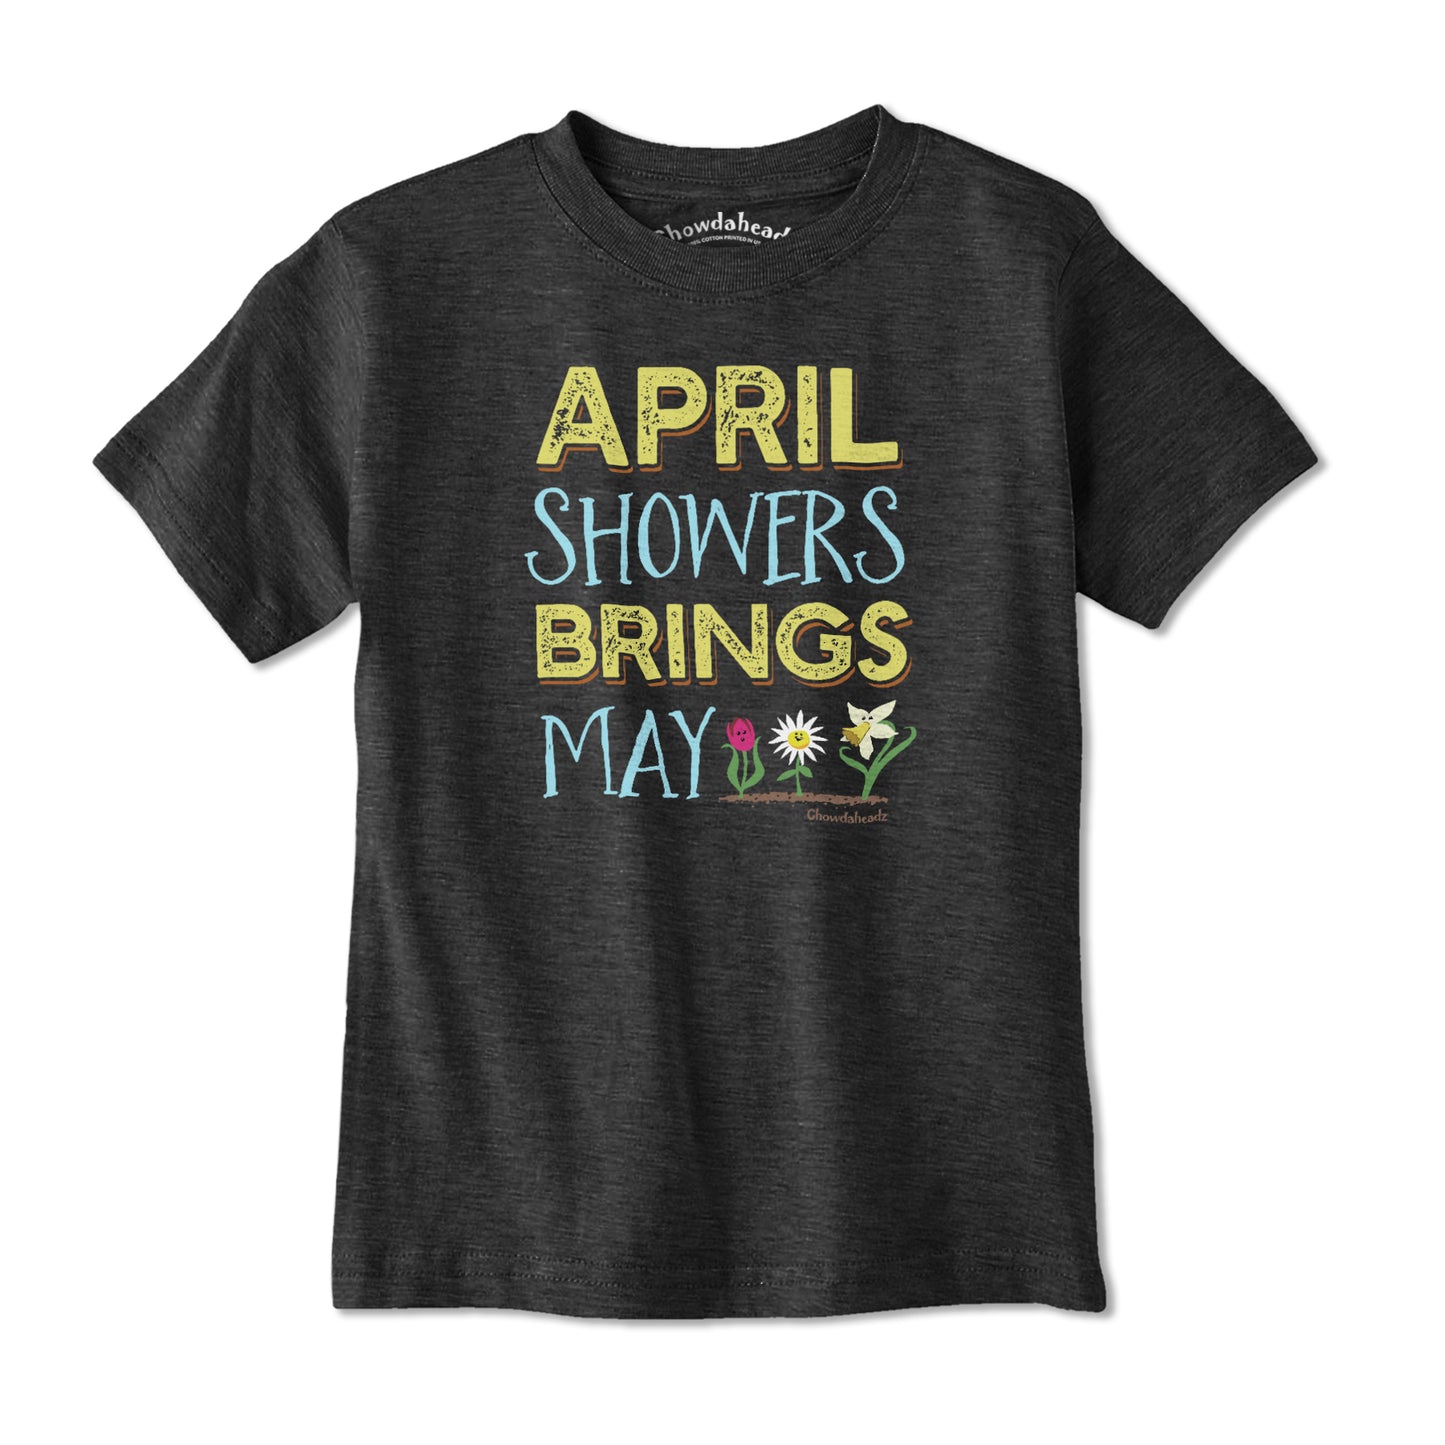 April Showers Bring May Flowers Youth T-Shirt - Chowdaheadz